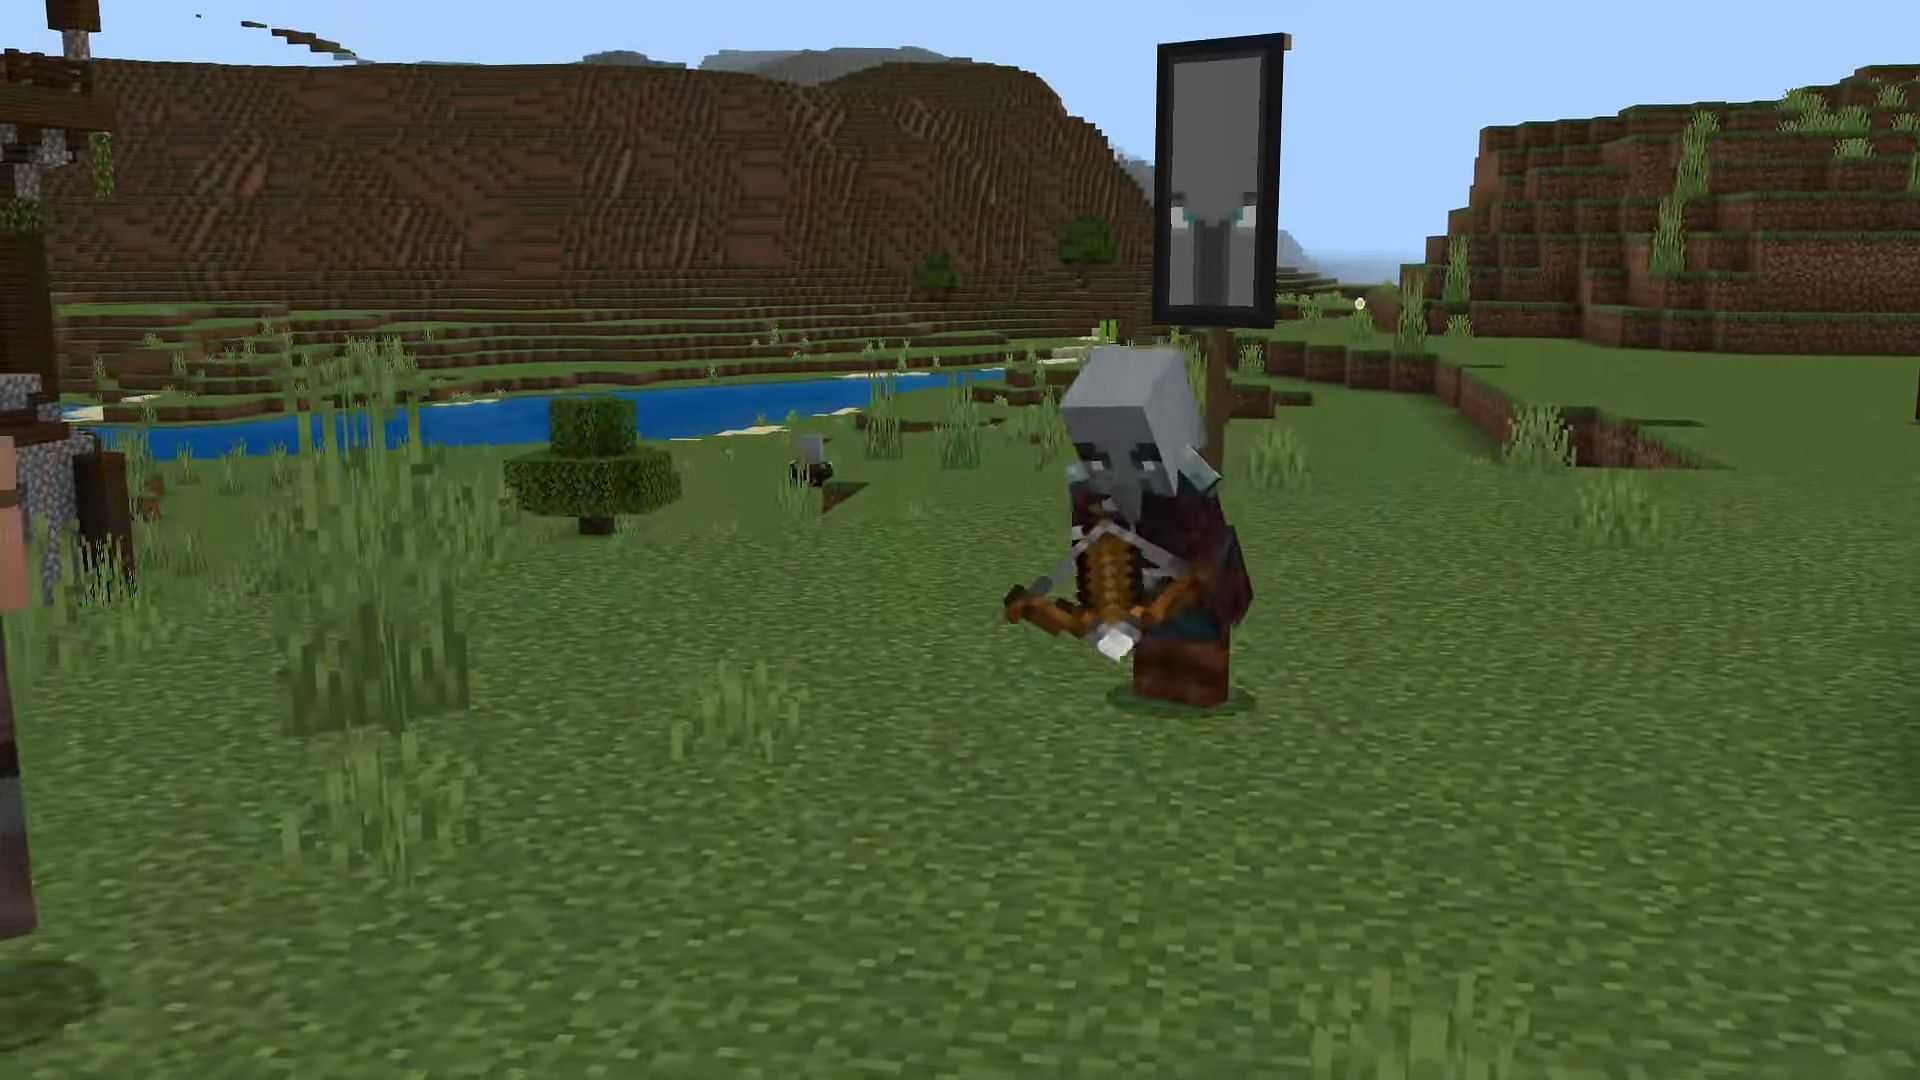 A pillager reloads its crossbow in Minecraft with Better Mob Animations activated (Image via Raboy13/YouTube)